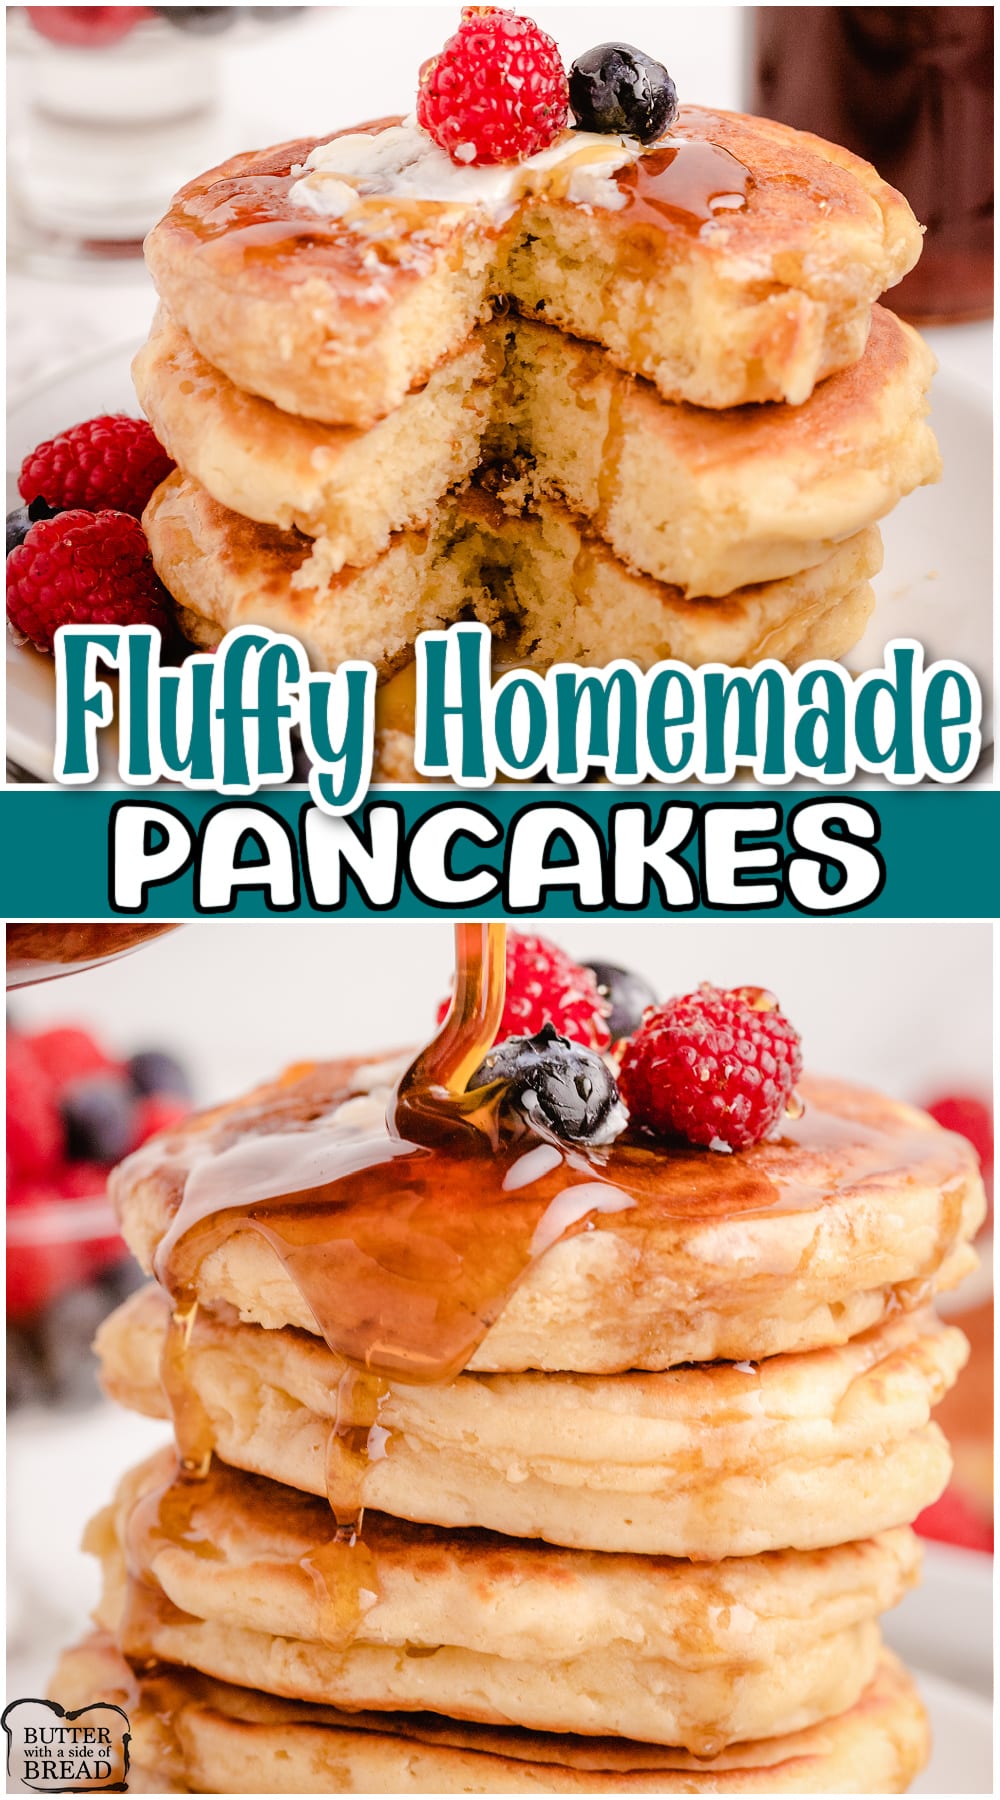 Making pancakes from scratch is easier than you may think & nothing beats the taste of fluffy homemade pancakes! Made easy with classic ingredients that you likely already have on hand, like flour, eggs, butter and milk.